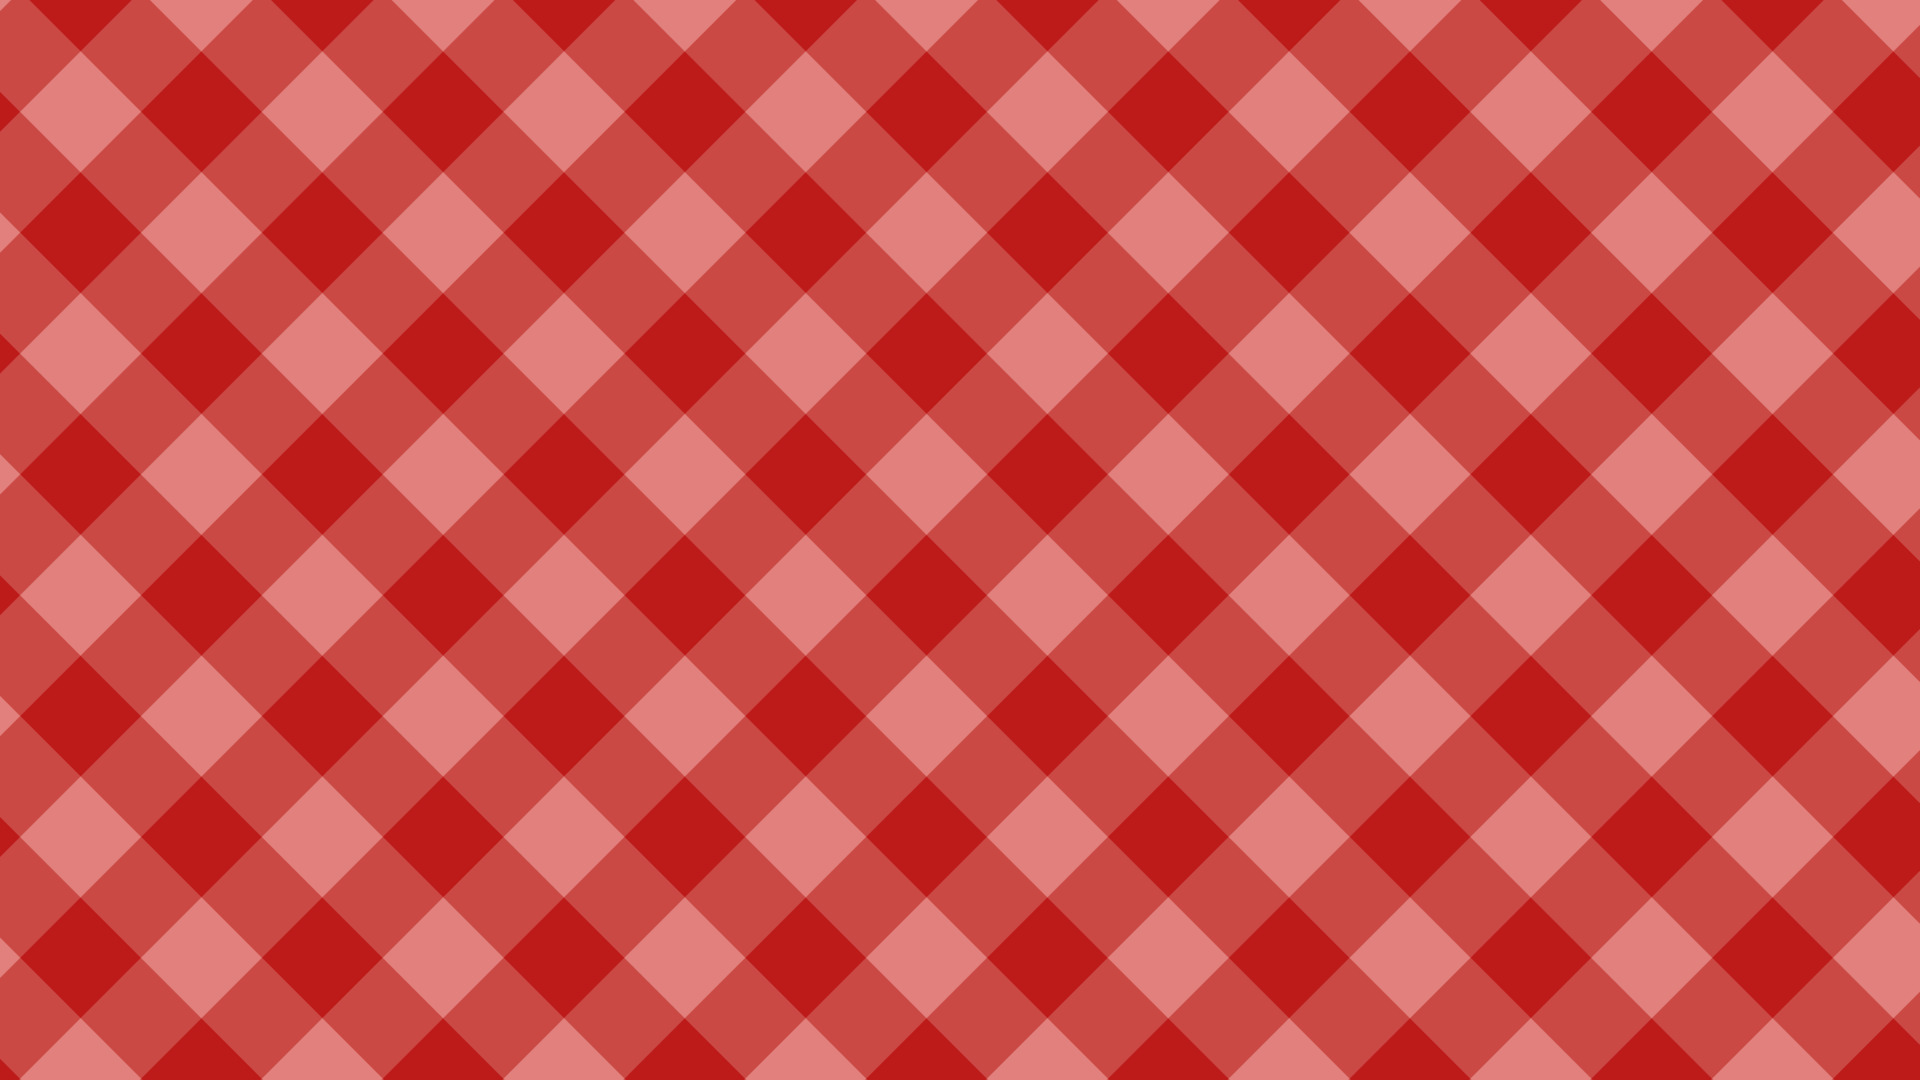 A red and pink plaid pattern. - Light red